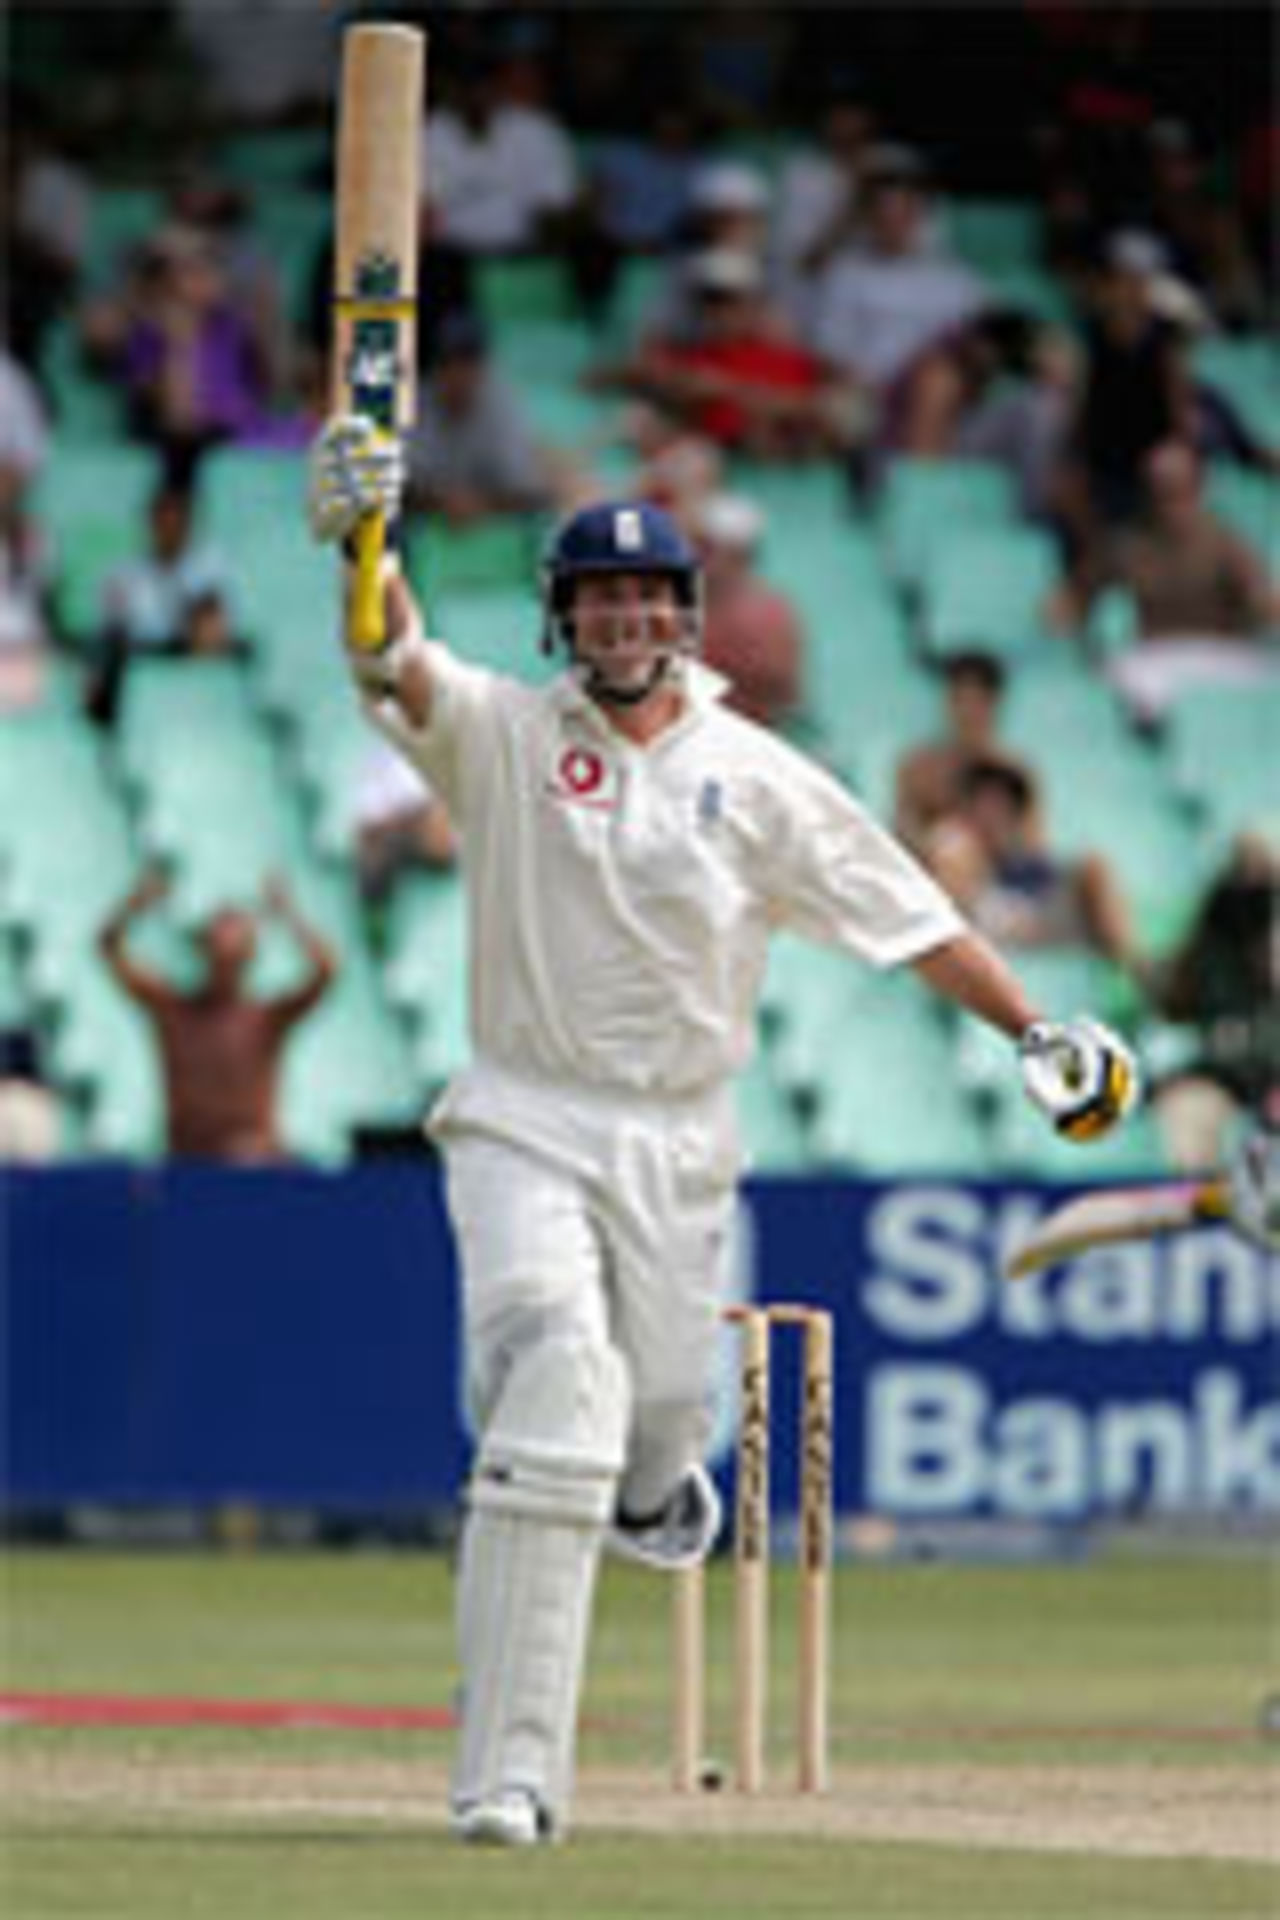 Marcus Trescothick celebrates bringing up his century on the second day at Durban, South Africa v England, second Test, December 28, 2004